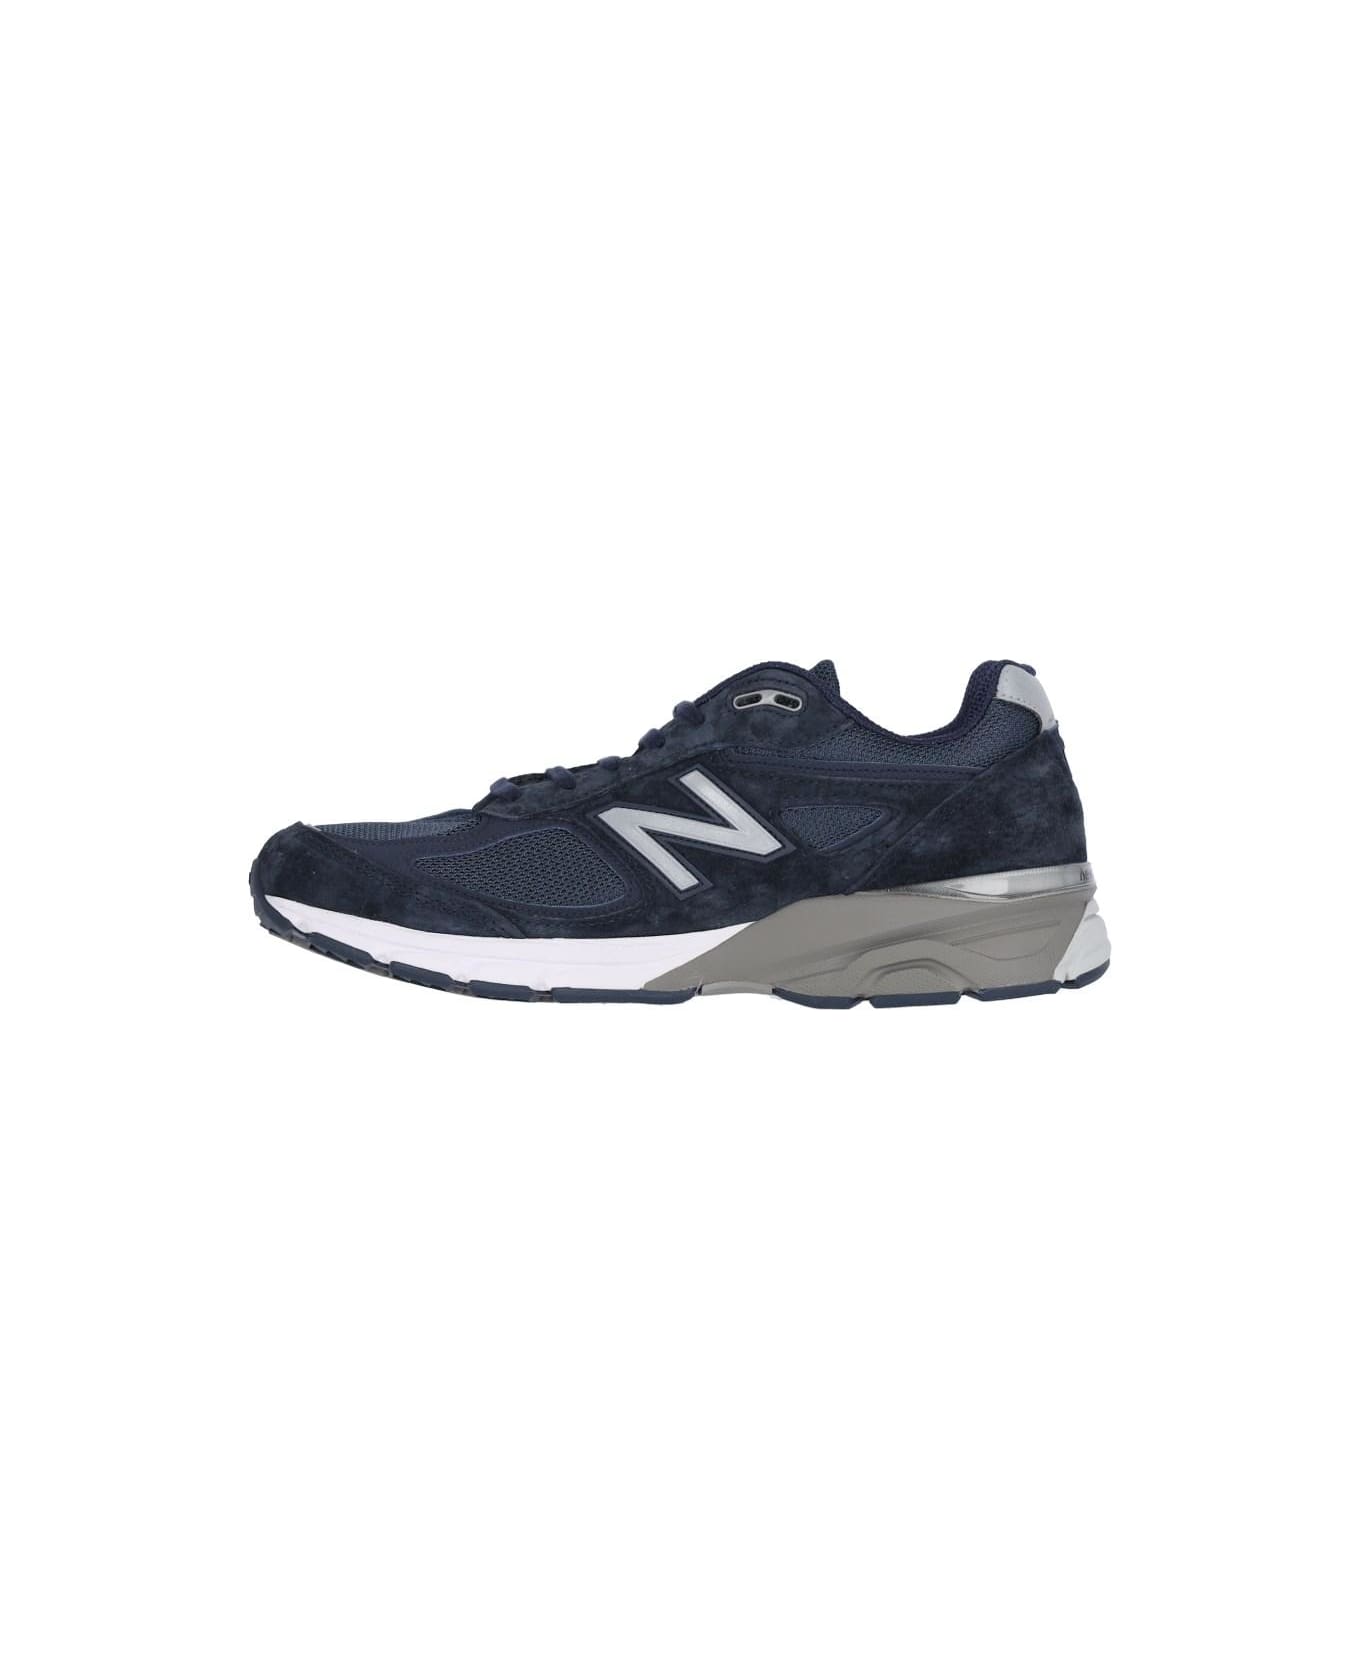 New Balance '990v4' Sneakers